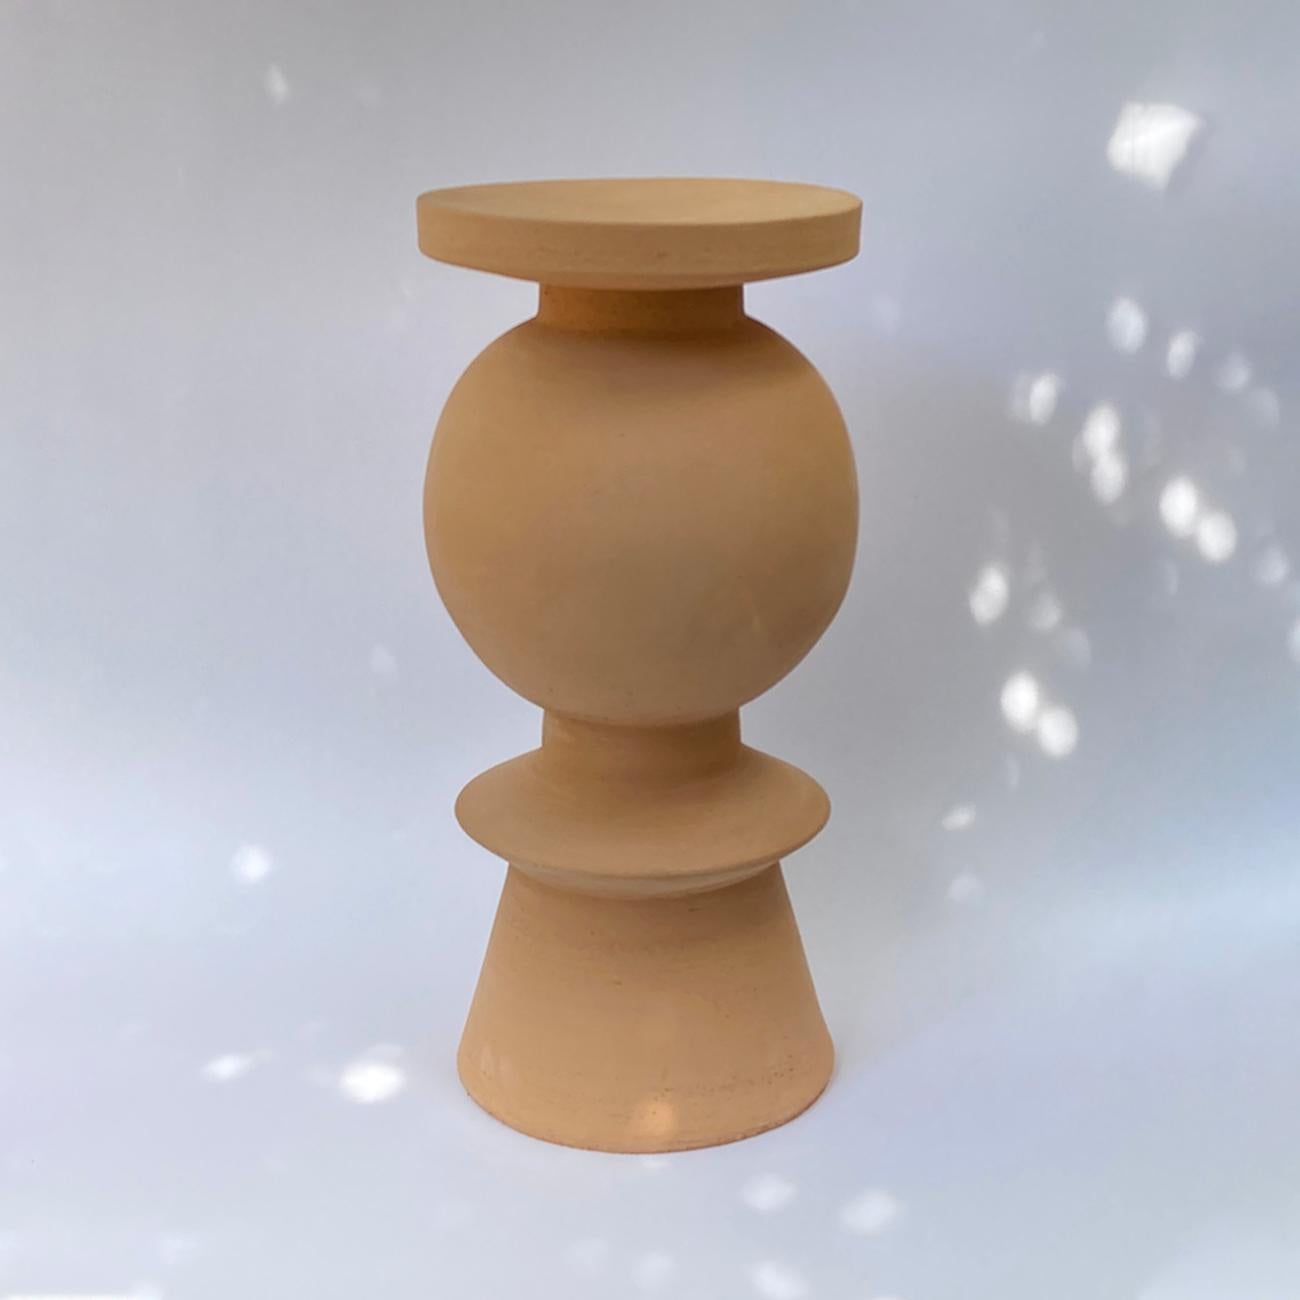 French Terracotta 1 Union Stool by Lea Ginac For Sale